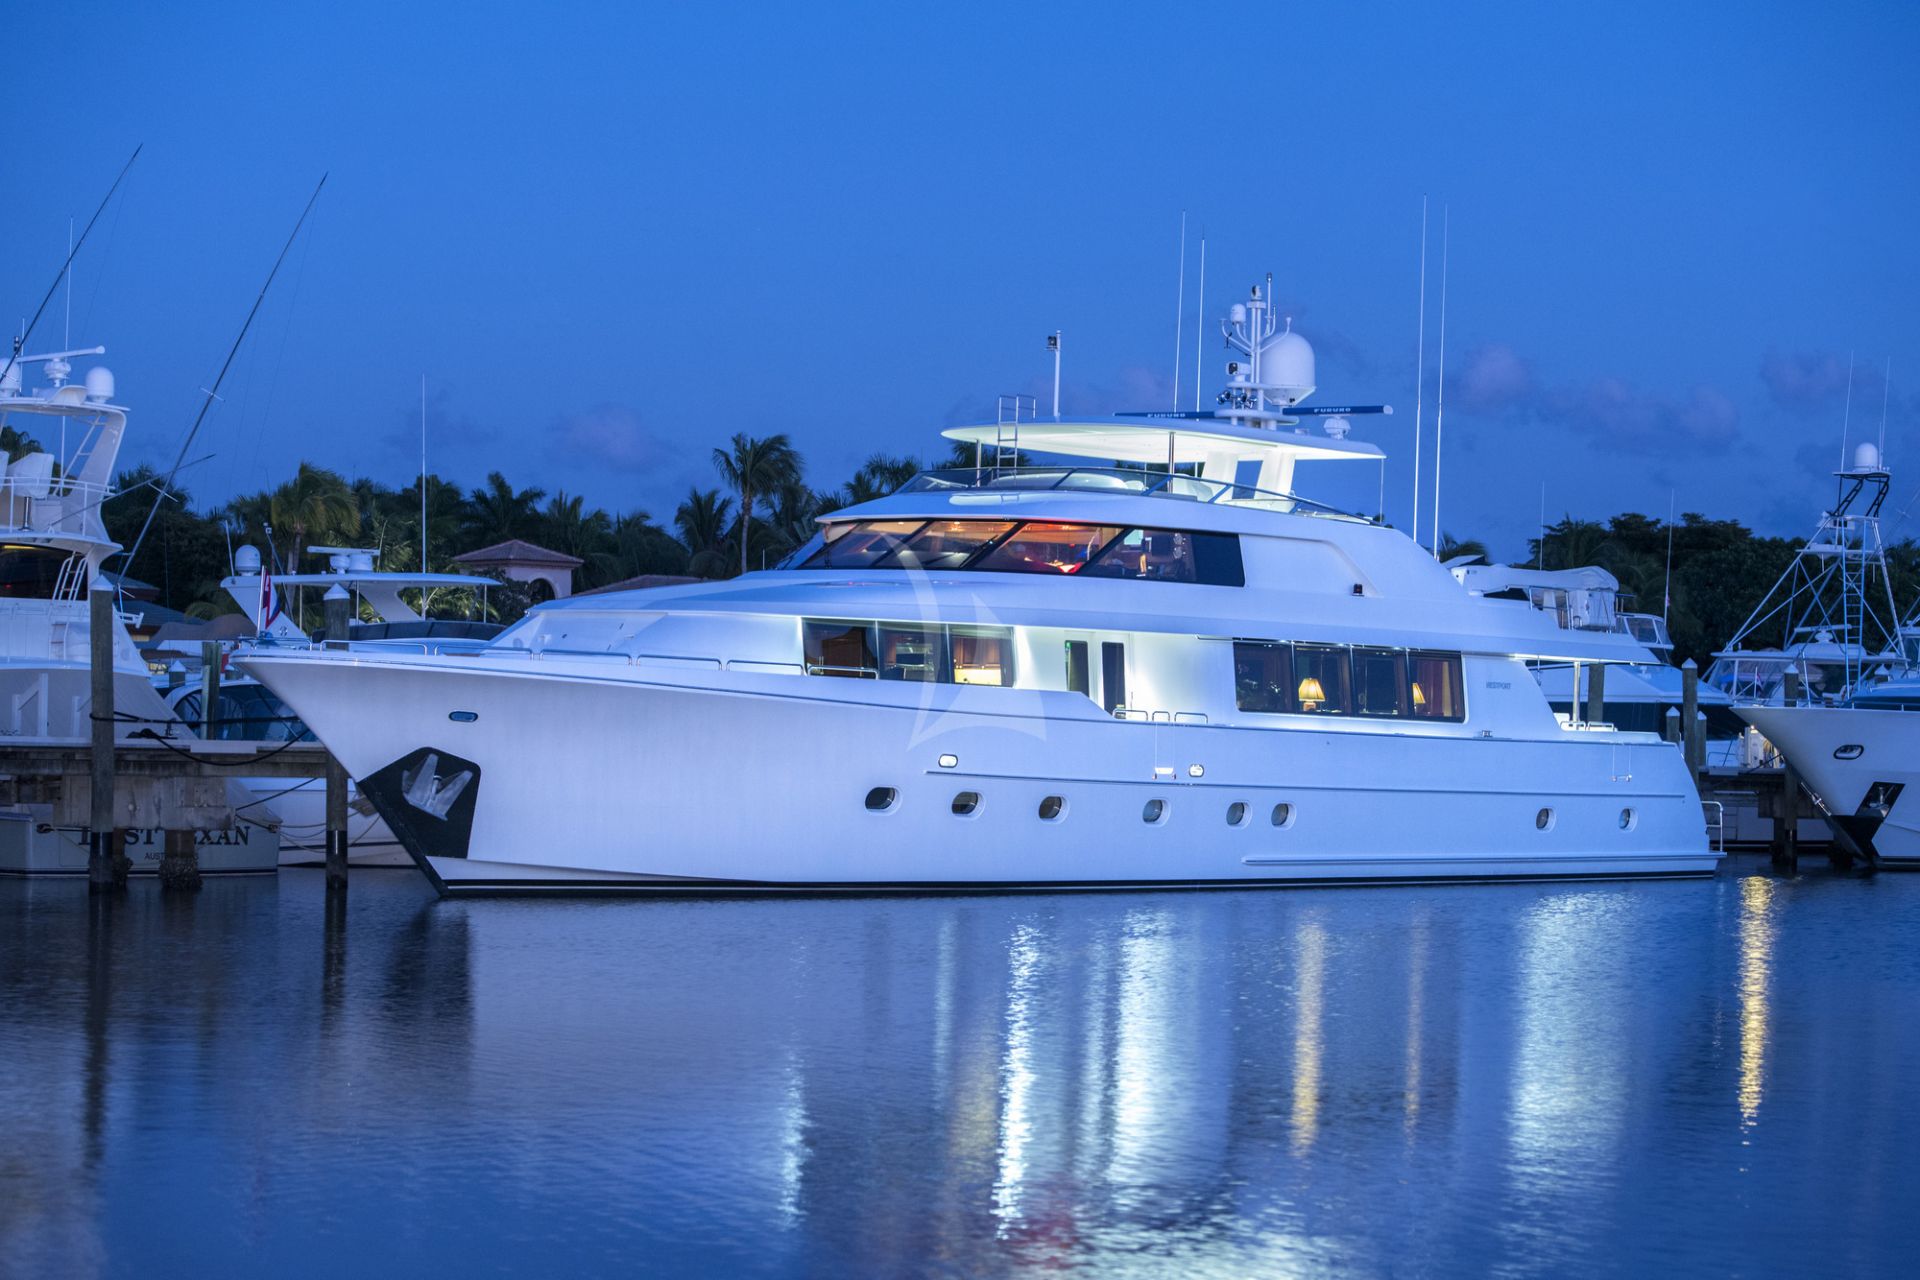 M/Y WILD KINGDOM yacht for charter at anchor